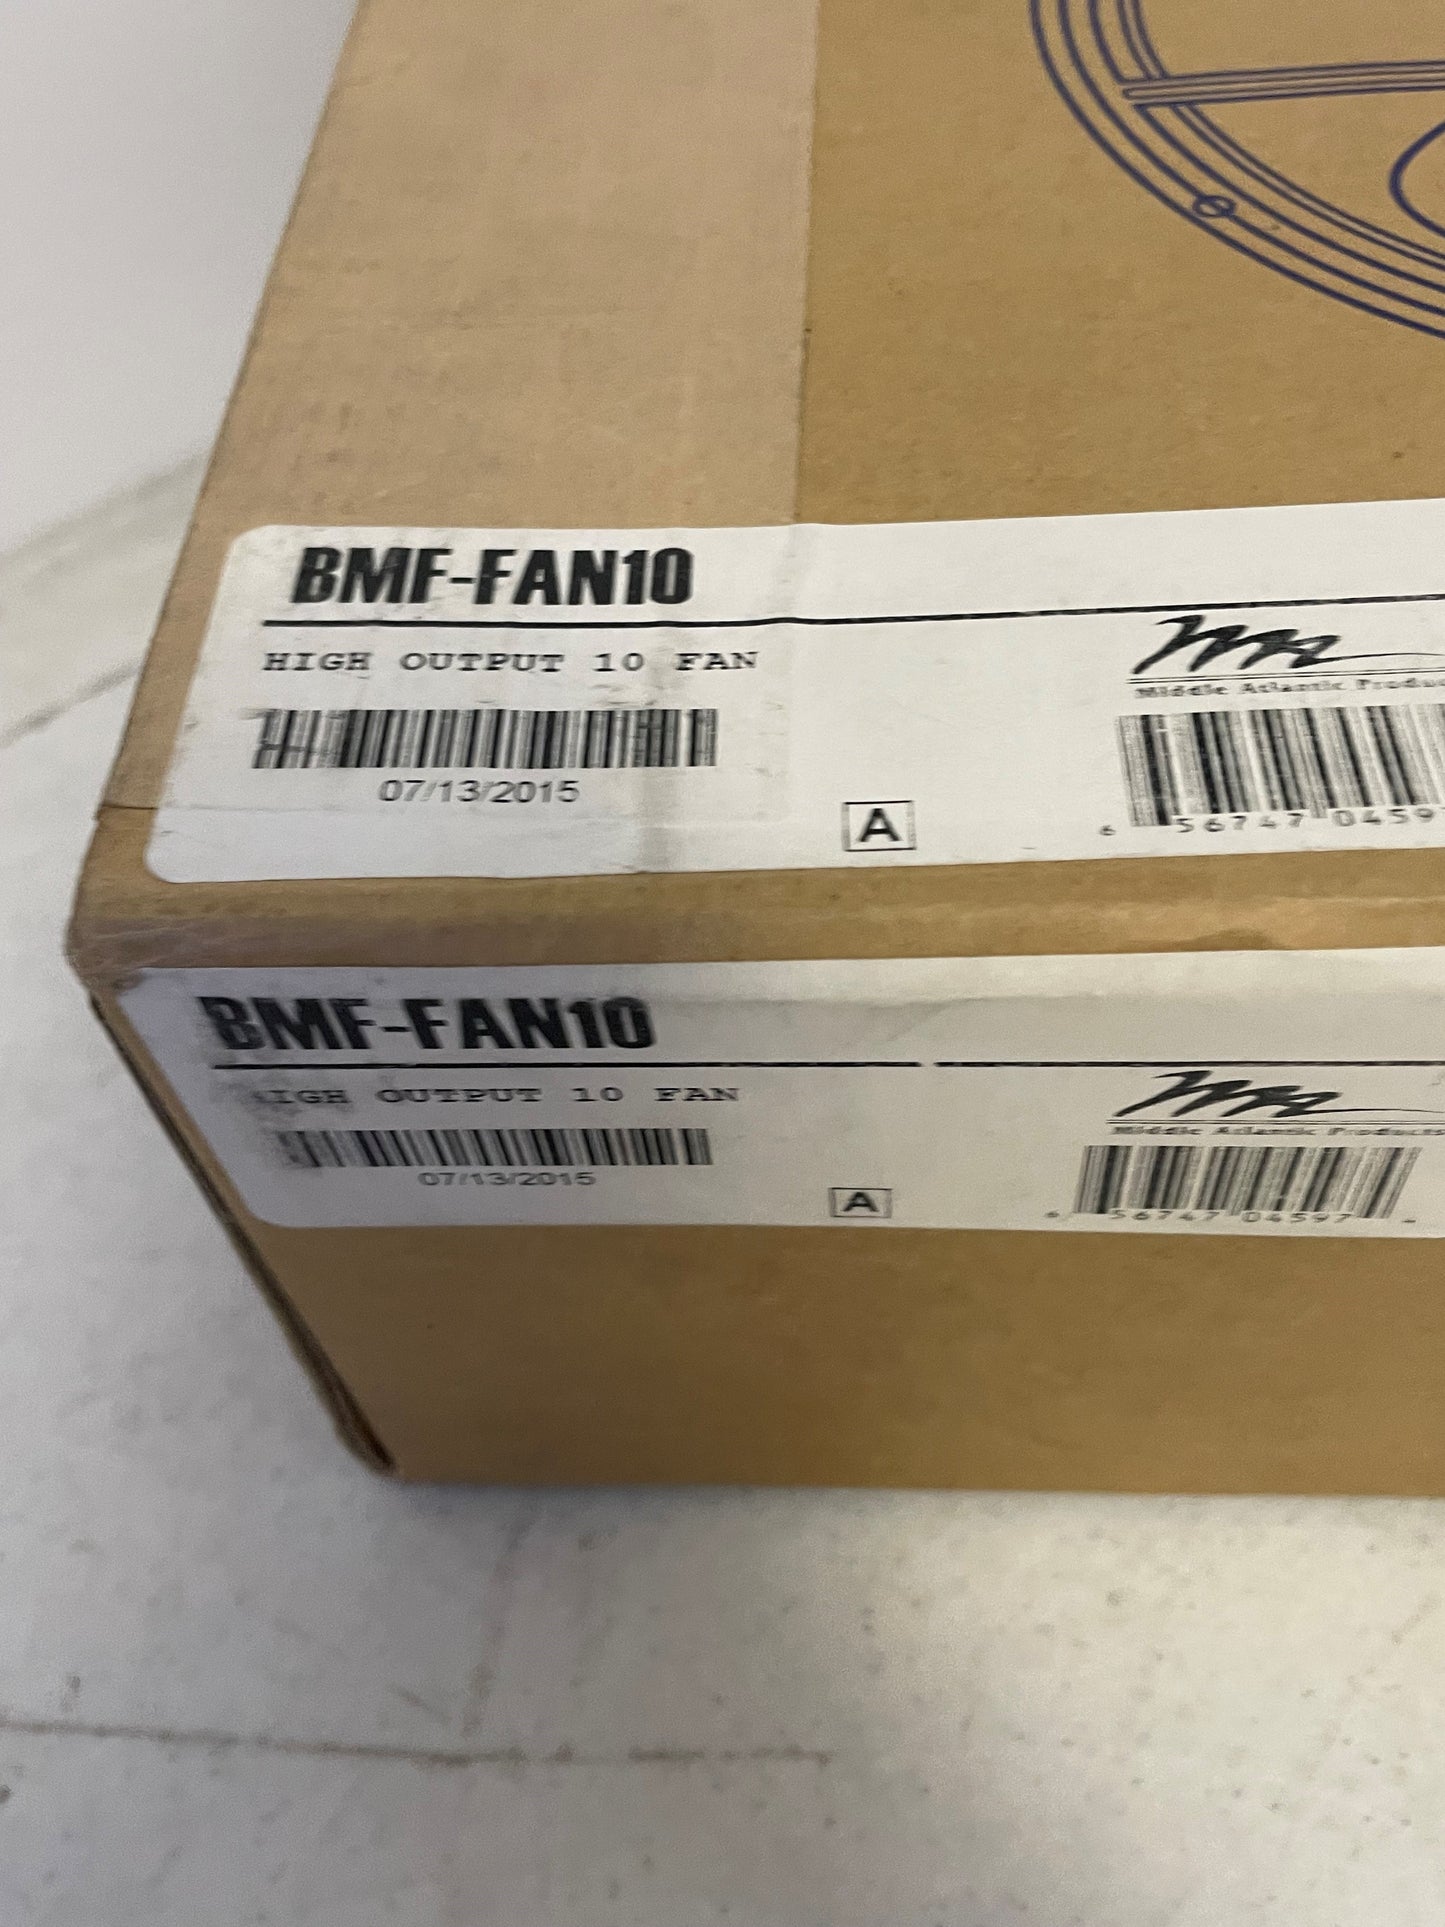 New Middle Atlantic BMF-FAN10, Lot of Four (4), NIB for Sale. We Sell Professional Audio Equipment. Audio Systems, Amplifiers, Consoles, Mixers, Electronics, Entertainment, Sound, Live.